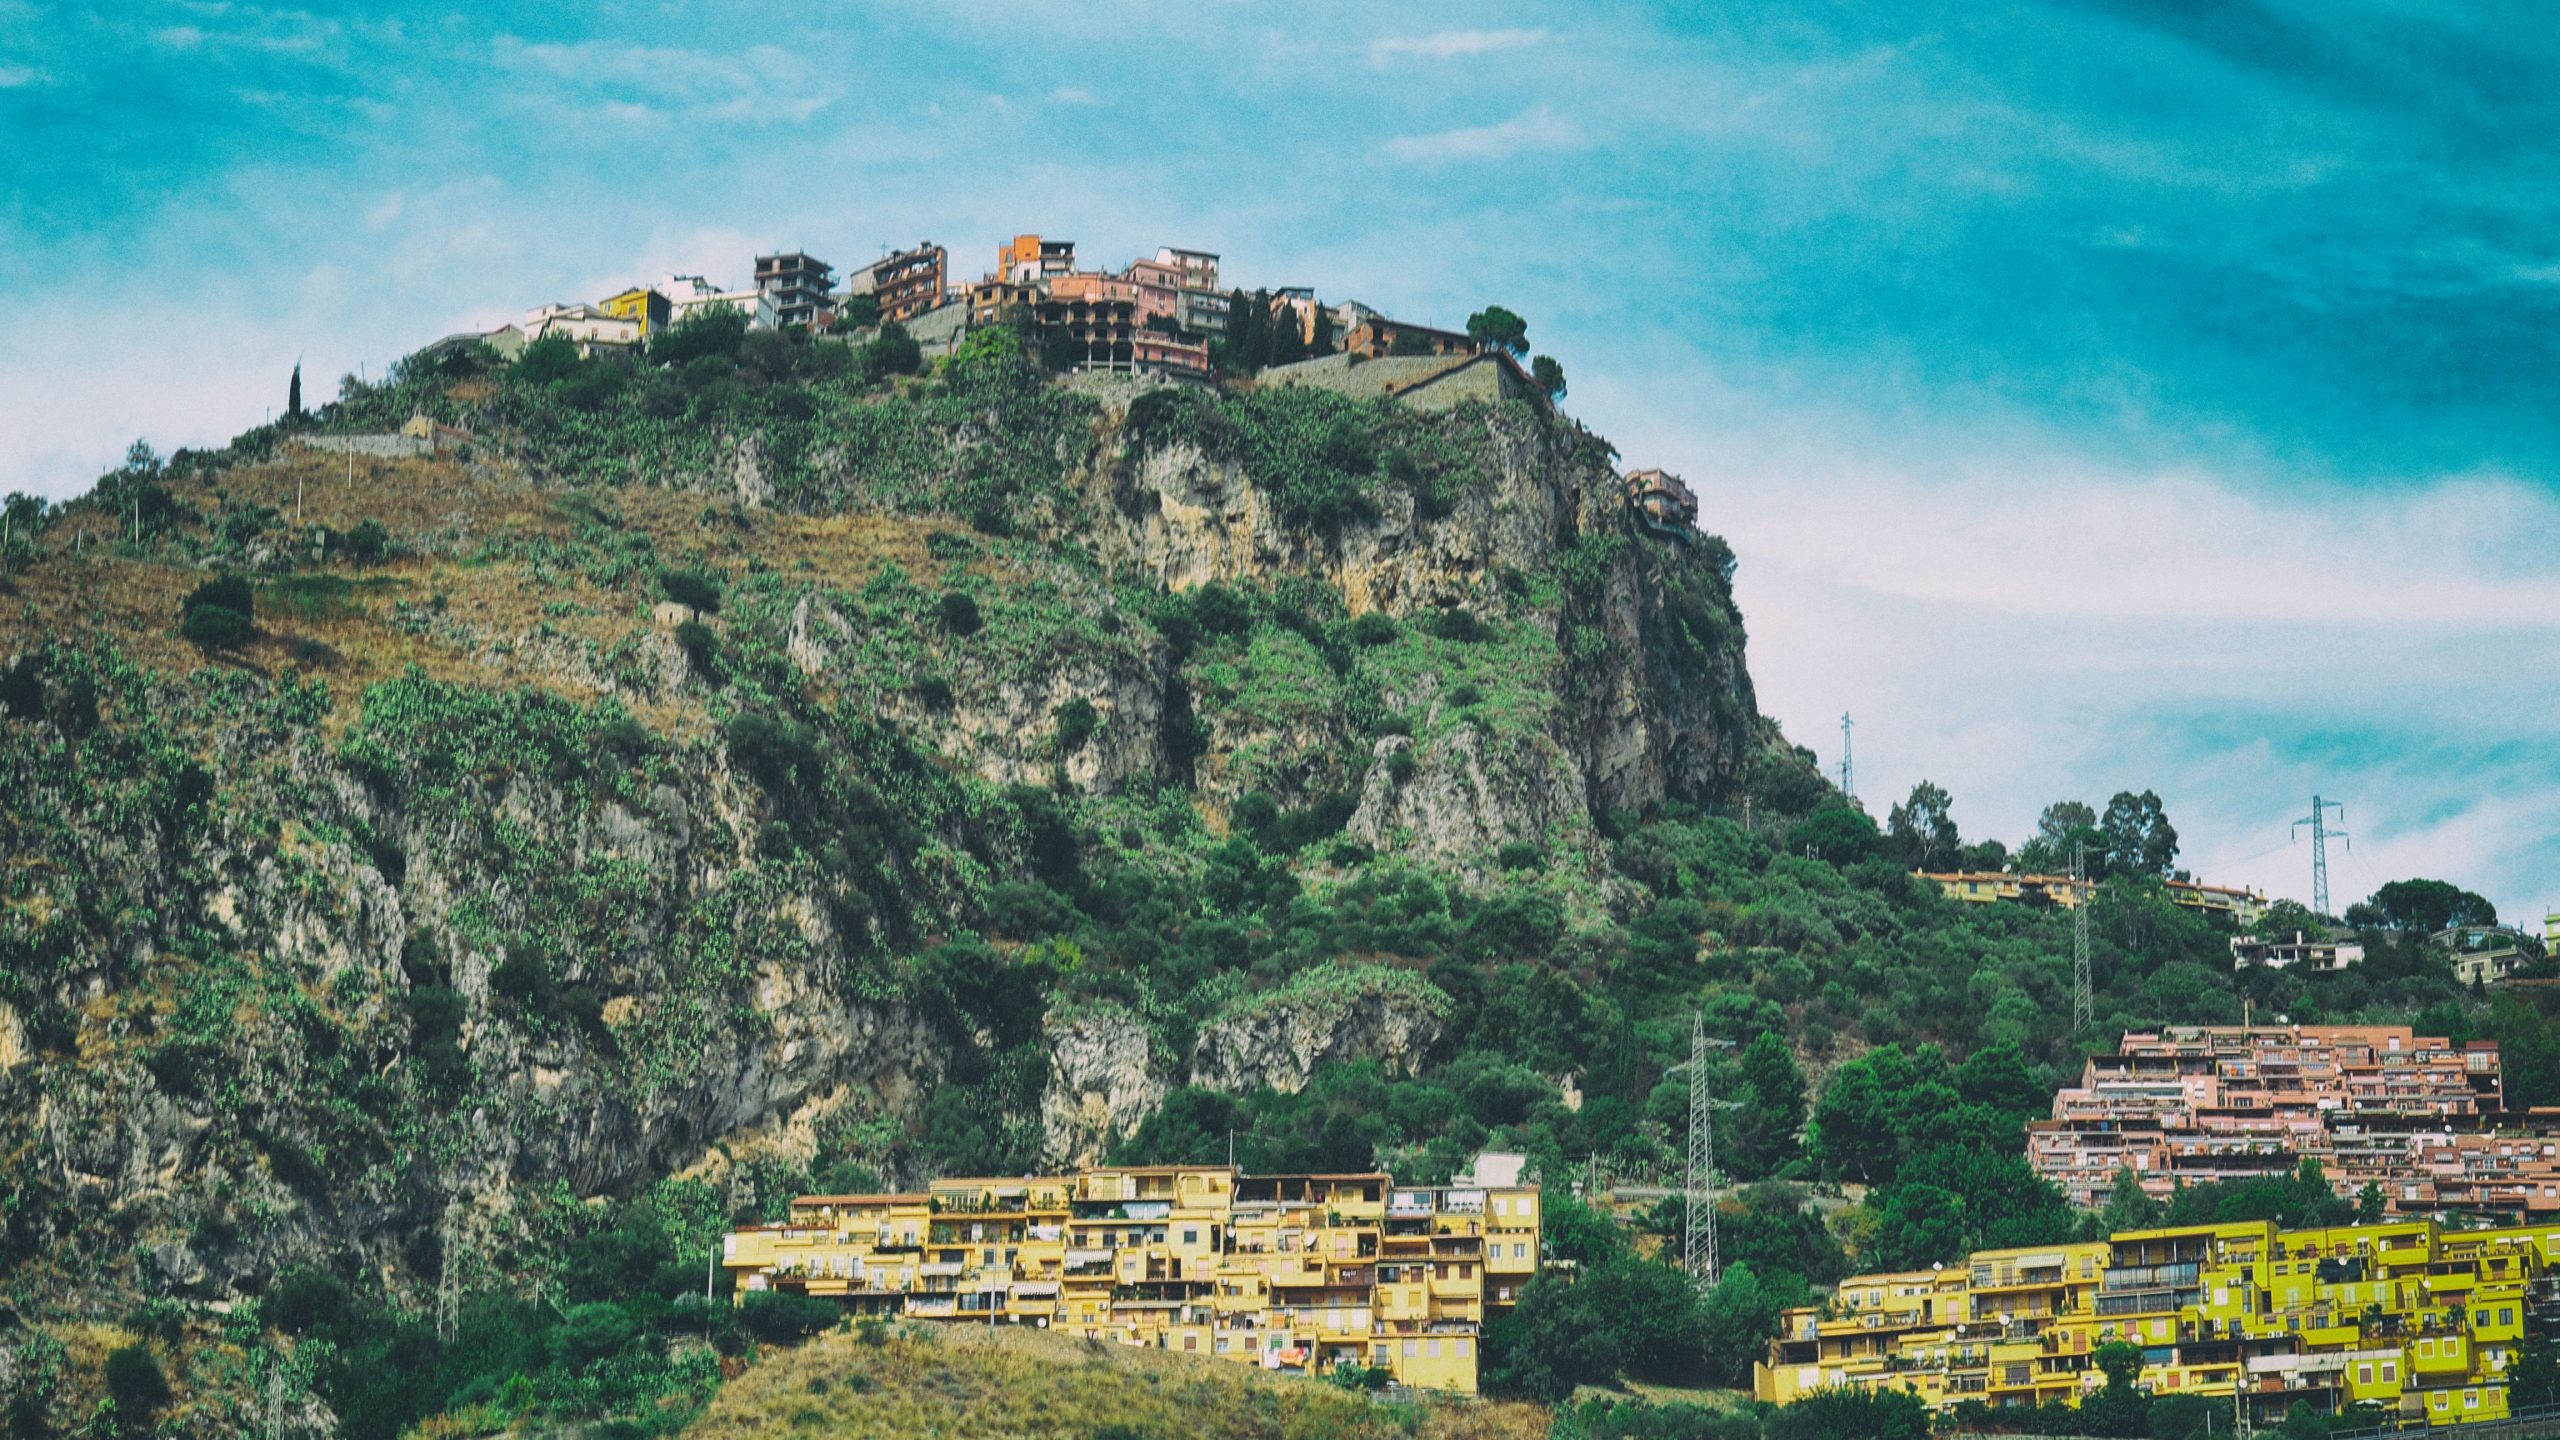 Castelmola with its charming mountain side